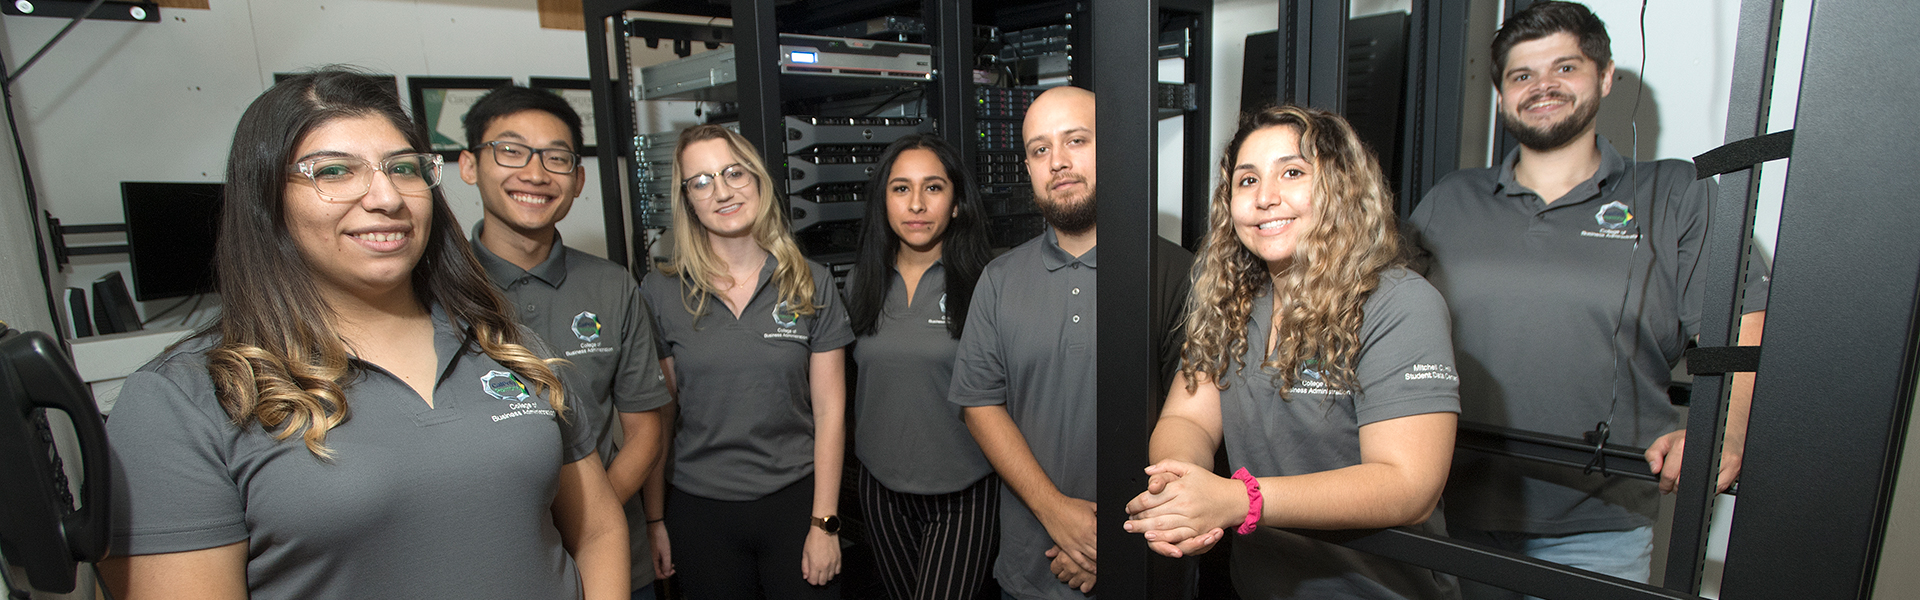 Students in the data center